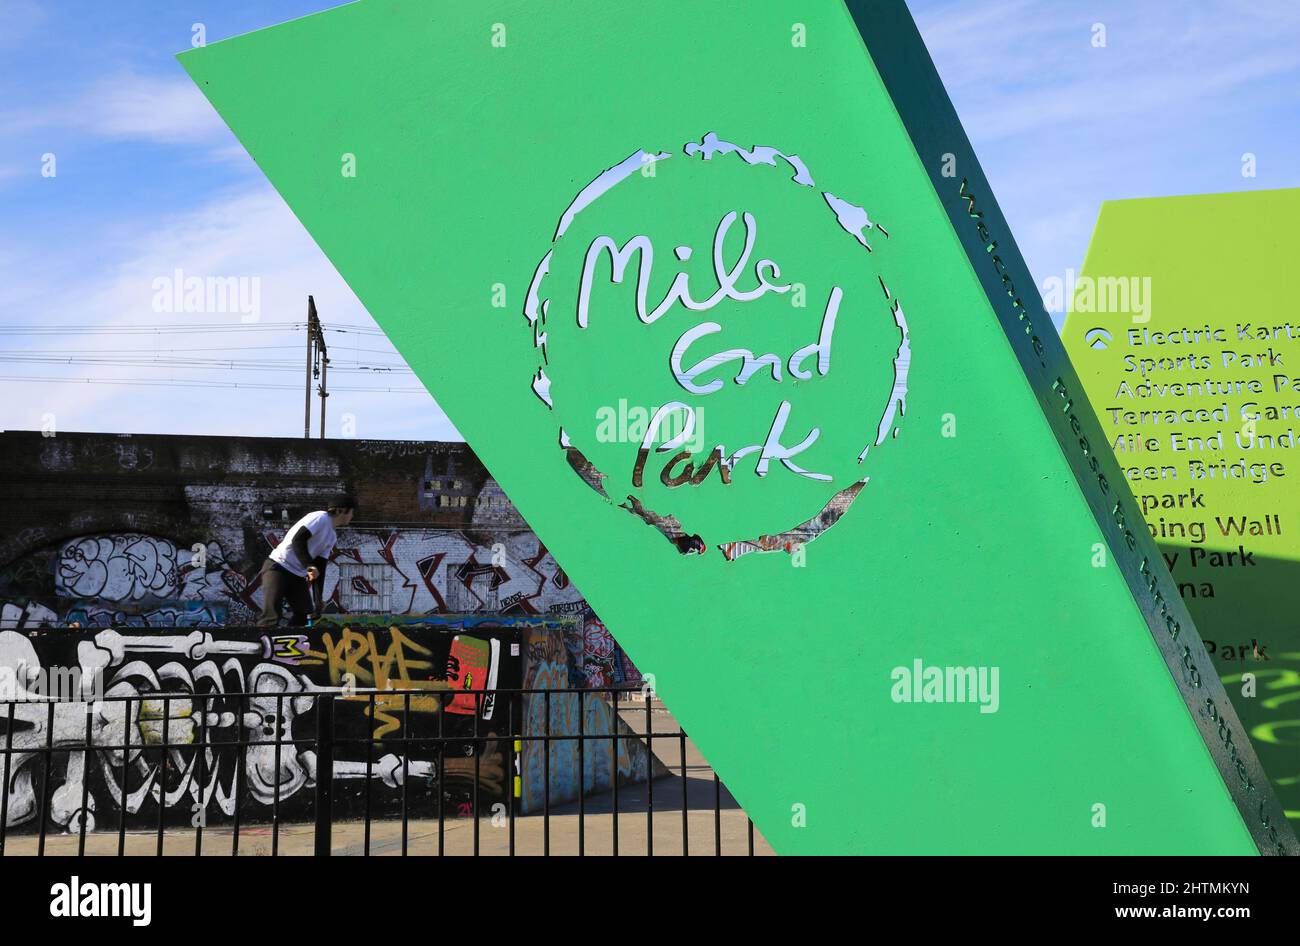 Sign for Mile End Park, by the Skatepark, in Tower Hamlets, east London, UK Stock Photo